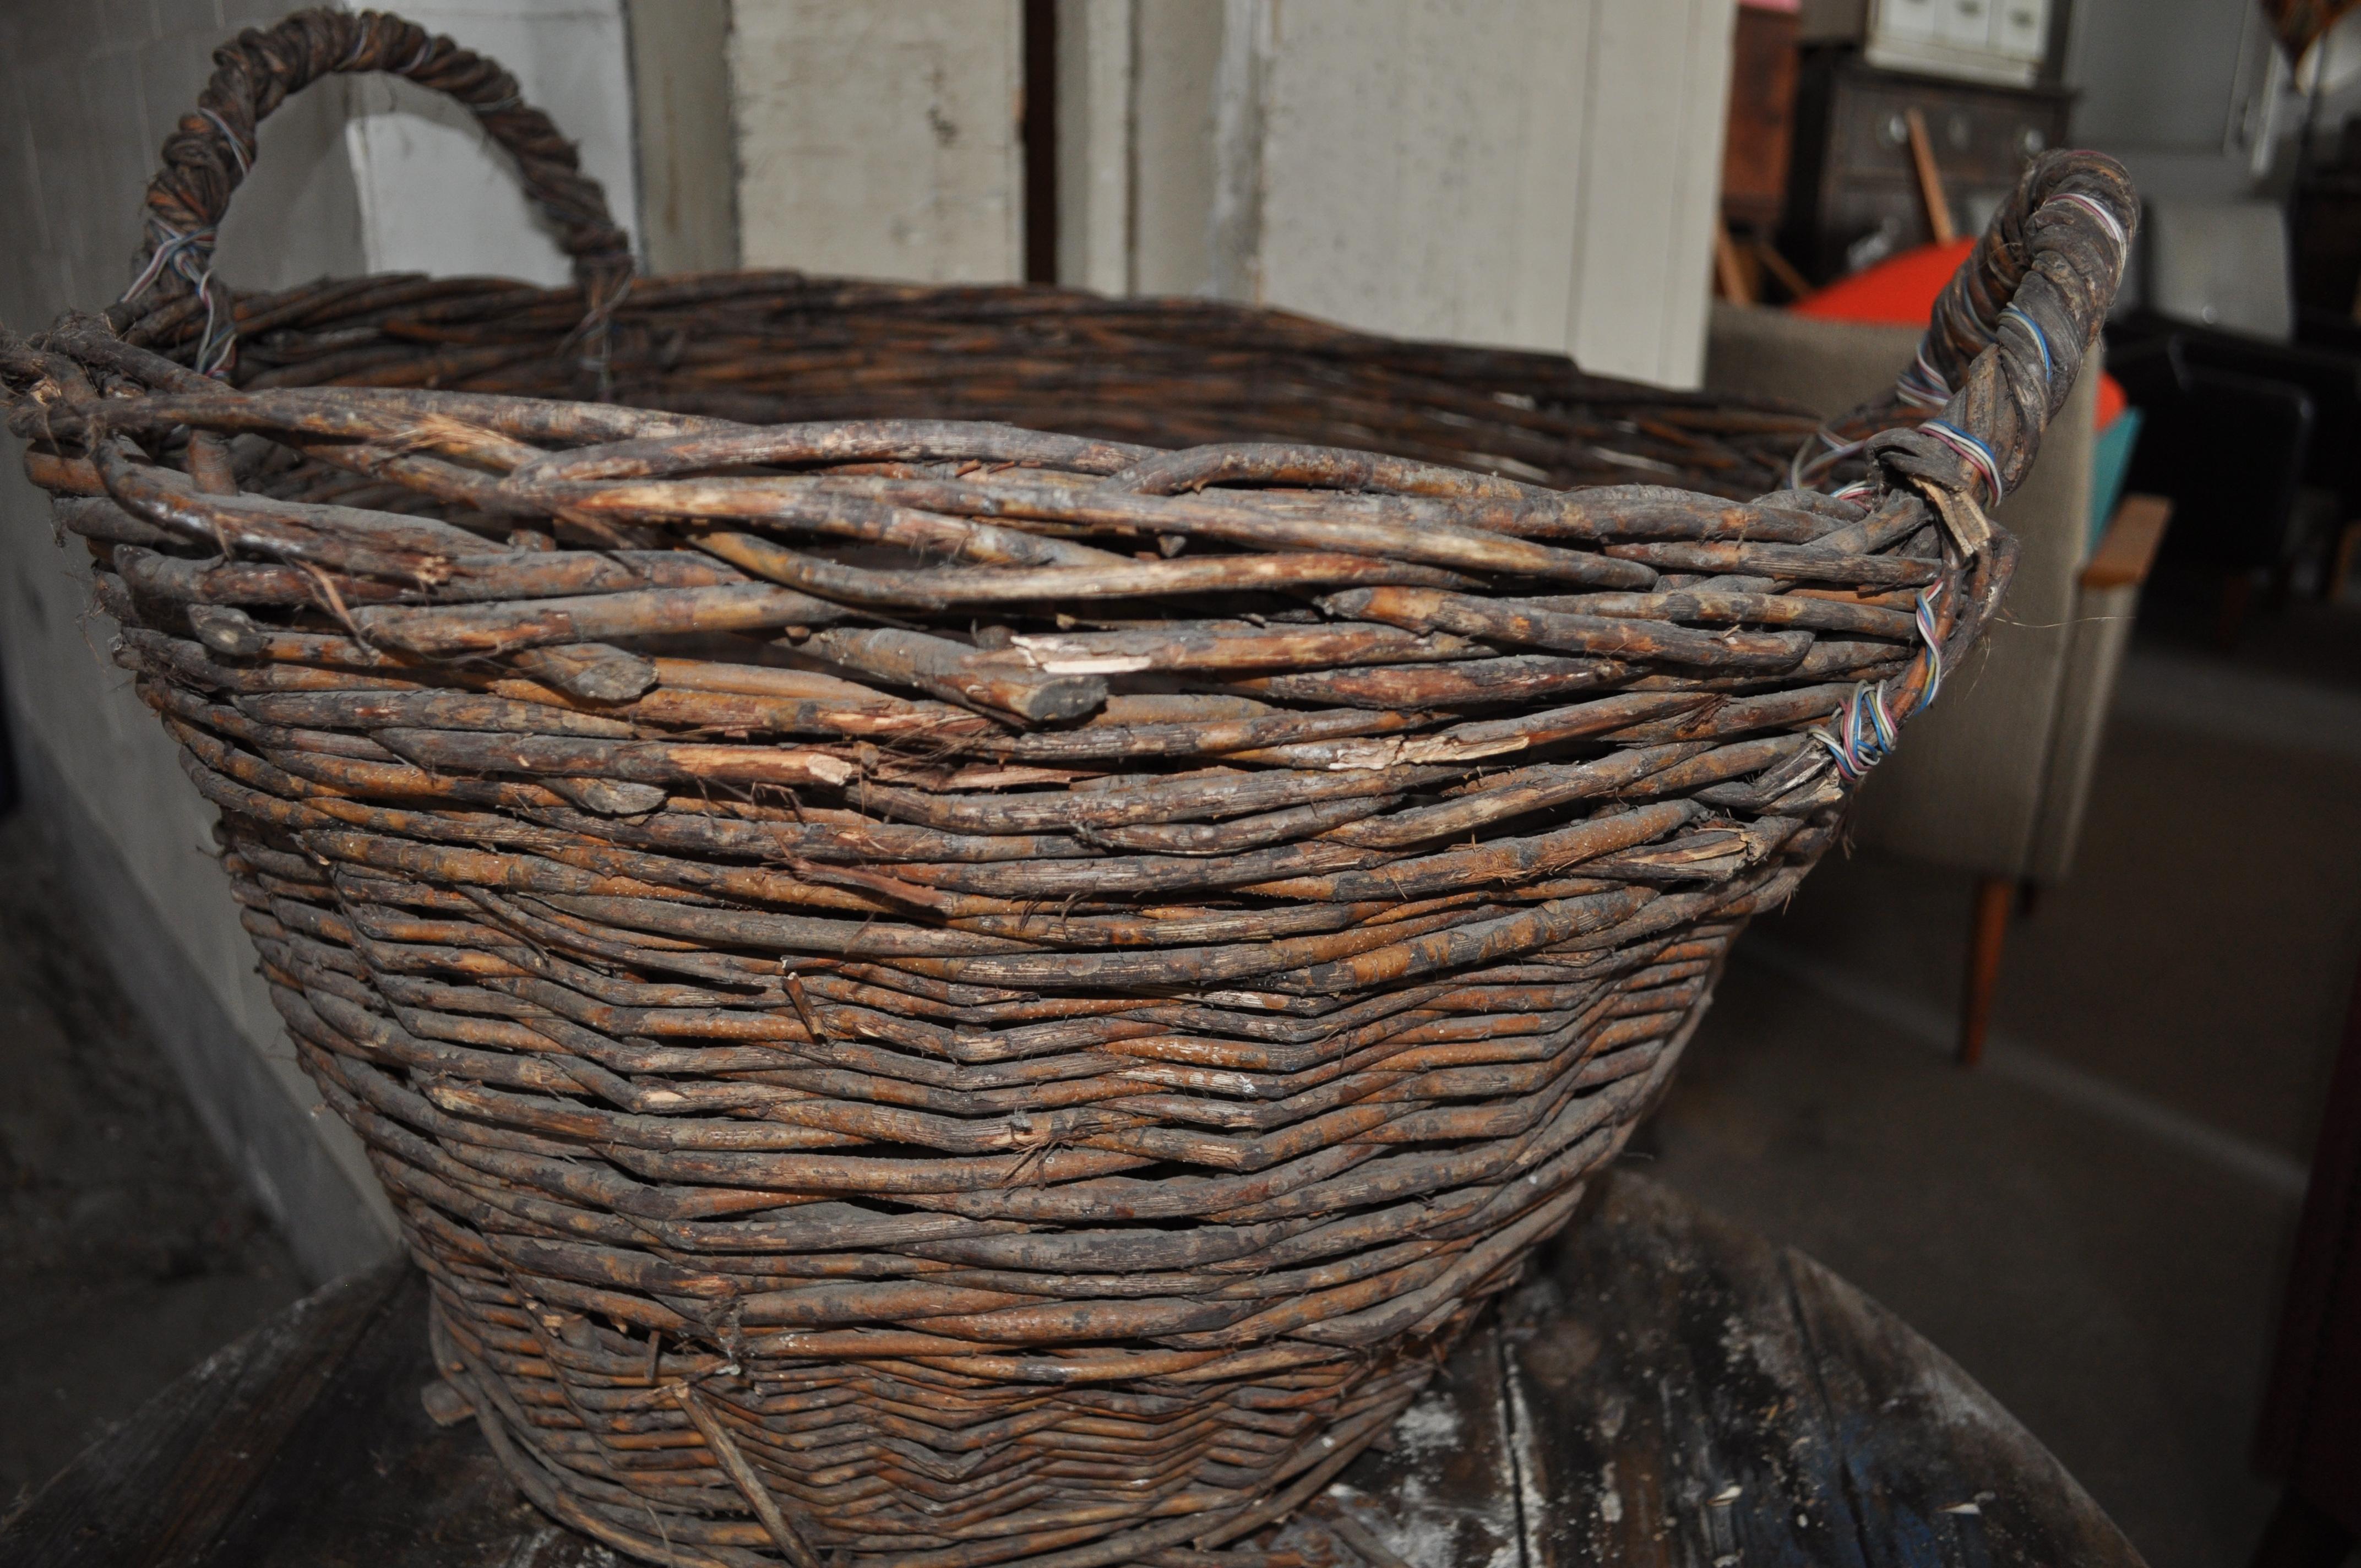 Vintage Basket with Handles from Hungary, circa 1940s (Rustikal) im Angebot